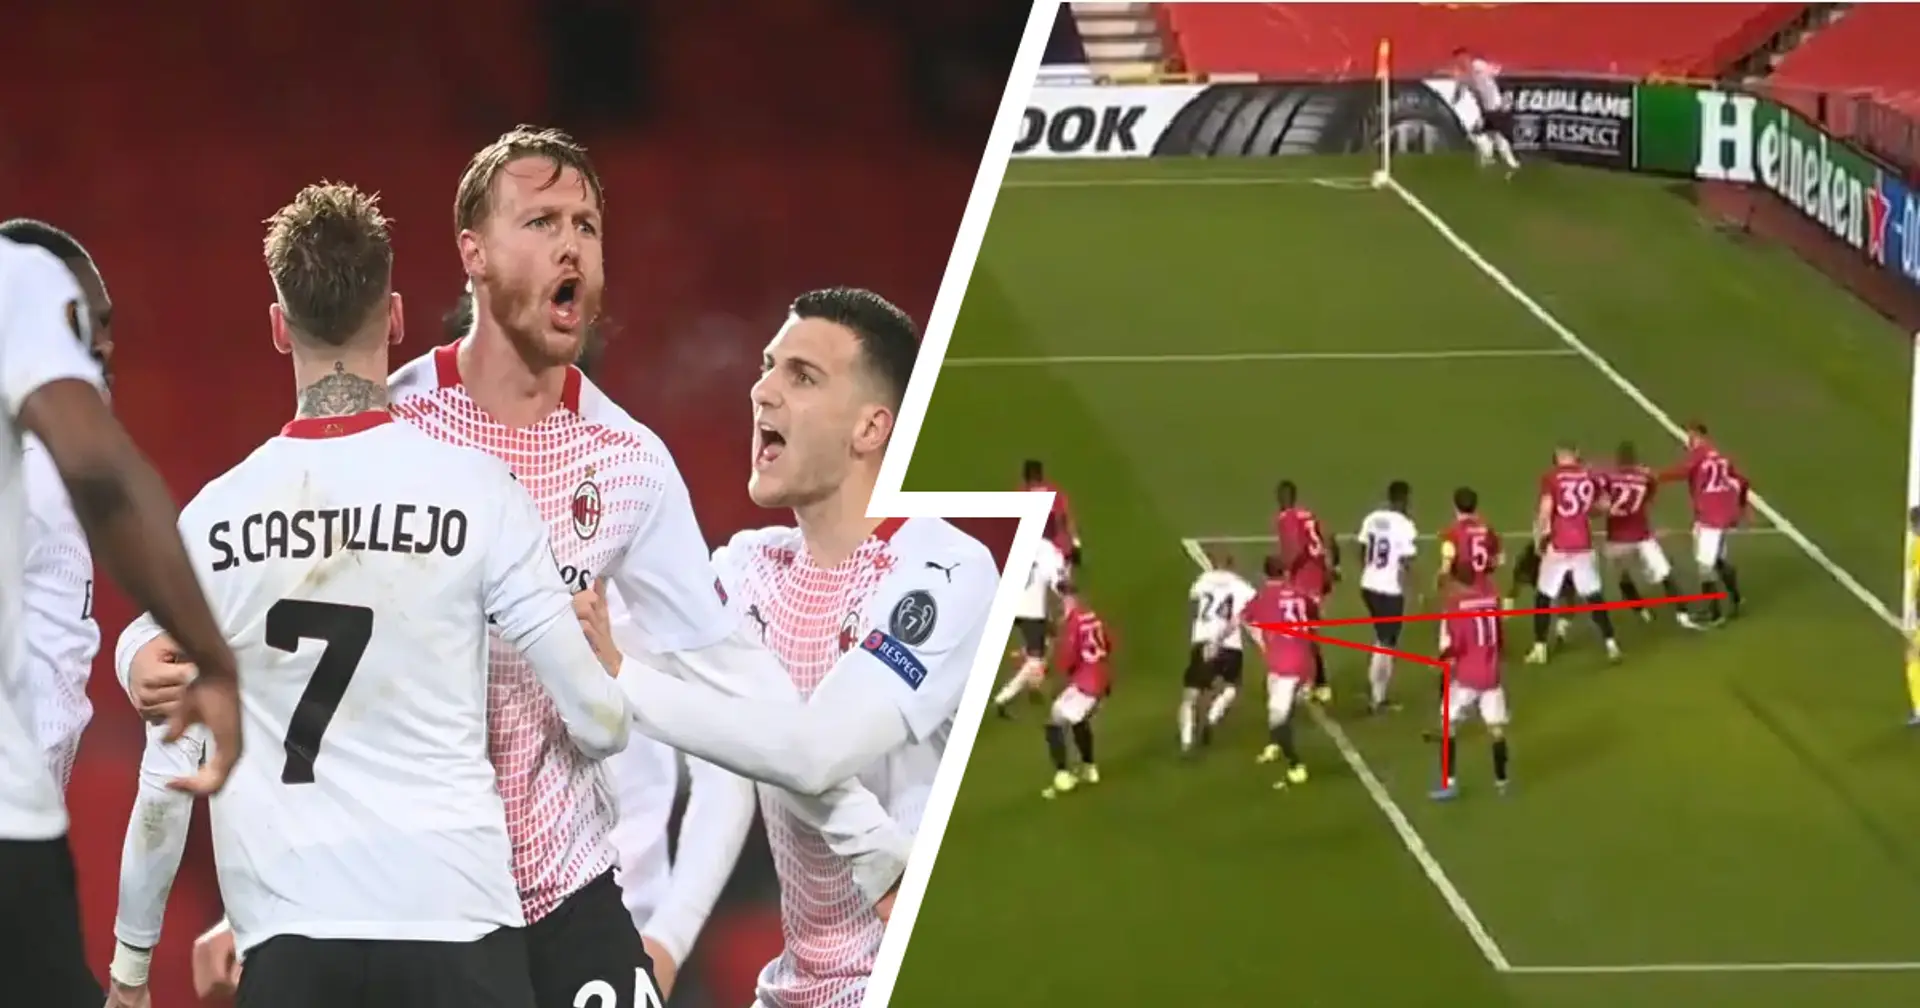 Explained: Why Man United should have done better to defend Simon Kjaer's last-minute header